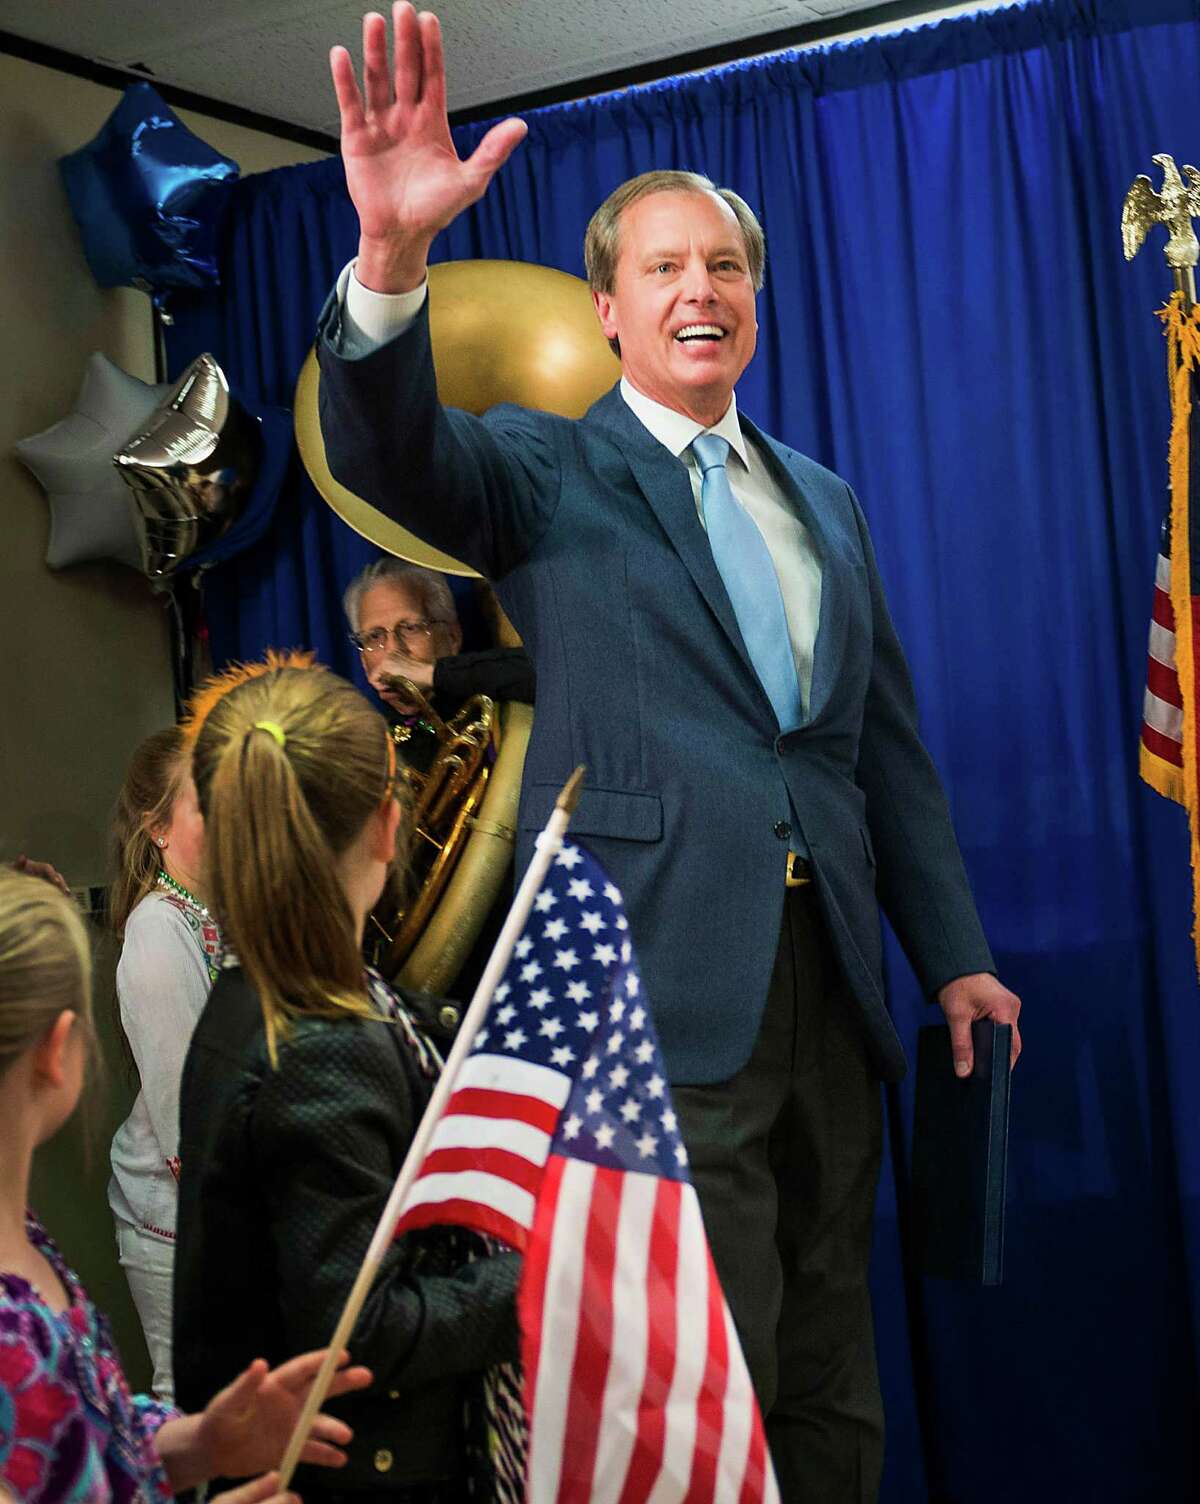 Texas lieutenant governor candidate Lt. Gov. David Dewhurst waves to supporters as he arrives for an election night party at his Houston campaign headquarters on Tuesday, March 4, 2014, in Houston. Dewhurst faces three Republican challengers for re-election in the primary. ( Smiley N. Pool / Houston Chronicle )